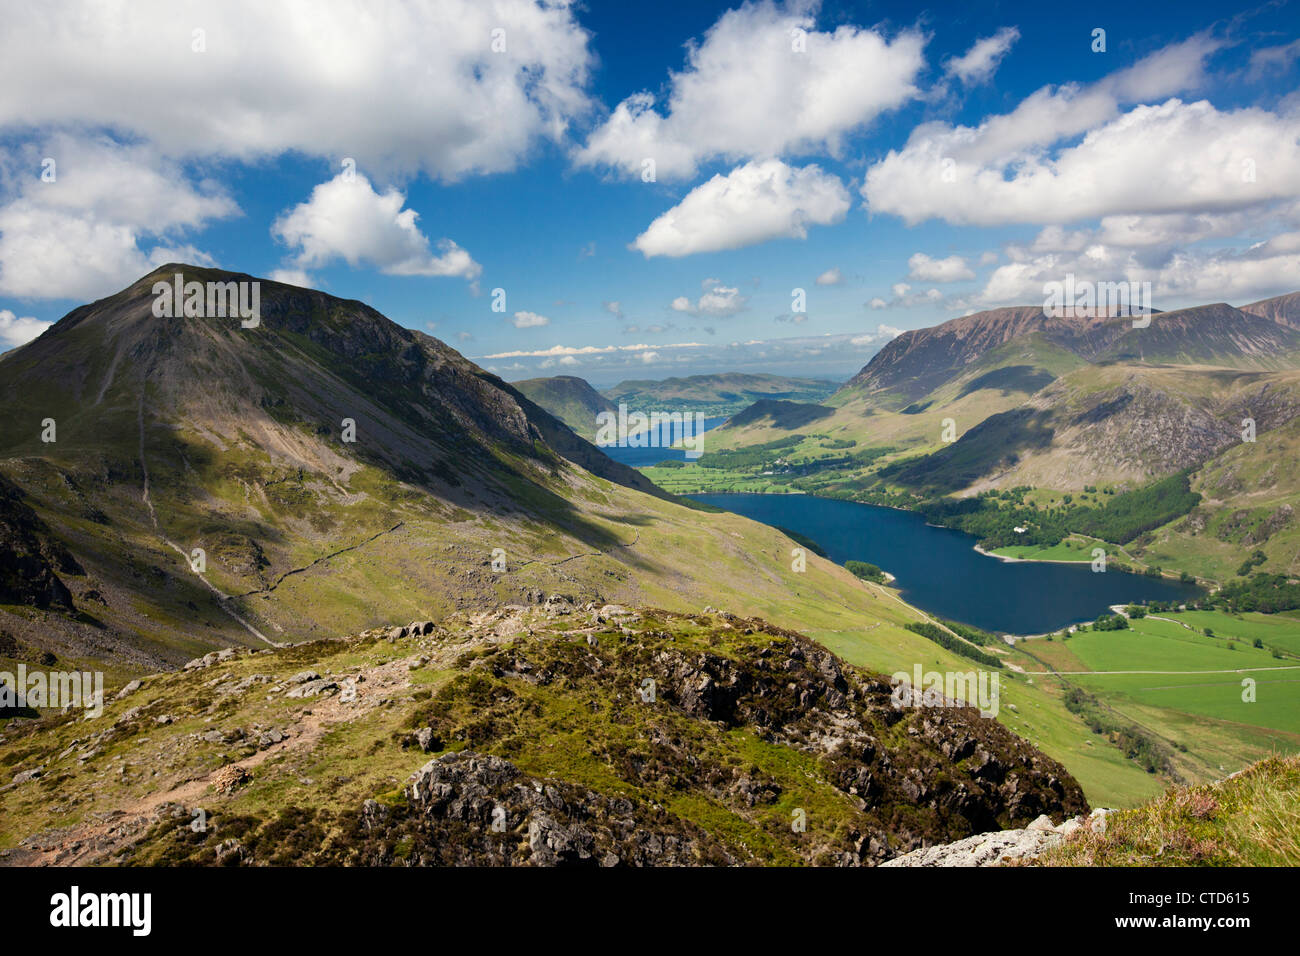 Buttermere Red Pike And Grasmoor Mountains Viewed From High On Haystacks Mountain, The Lake District Cumbria Lakeland England UK Stock Photo